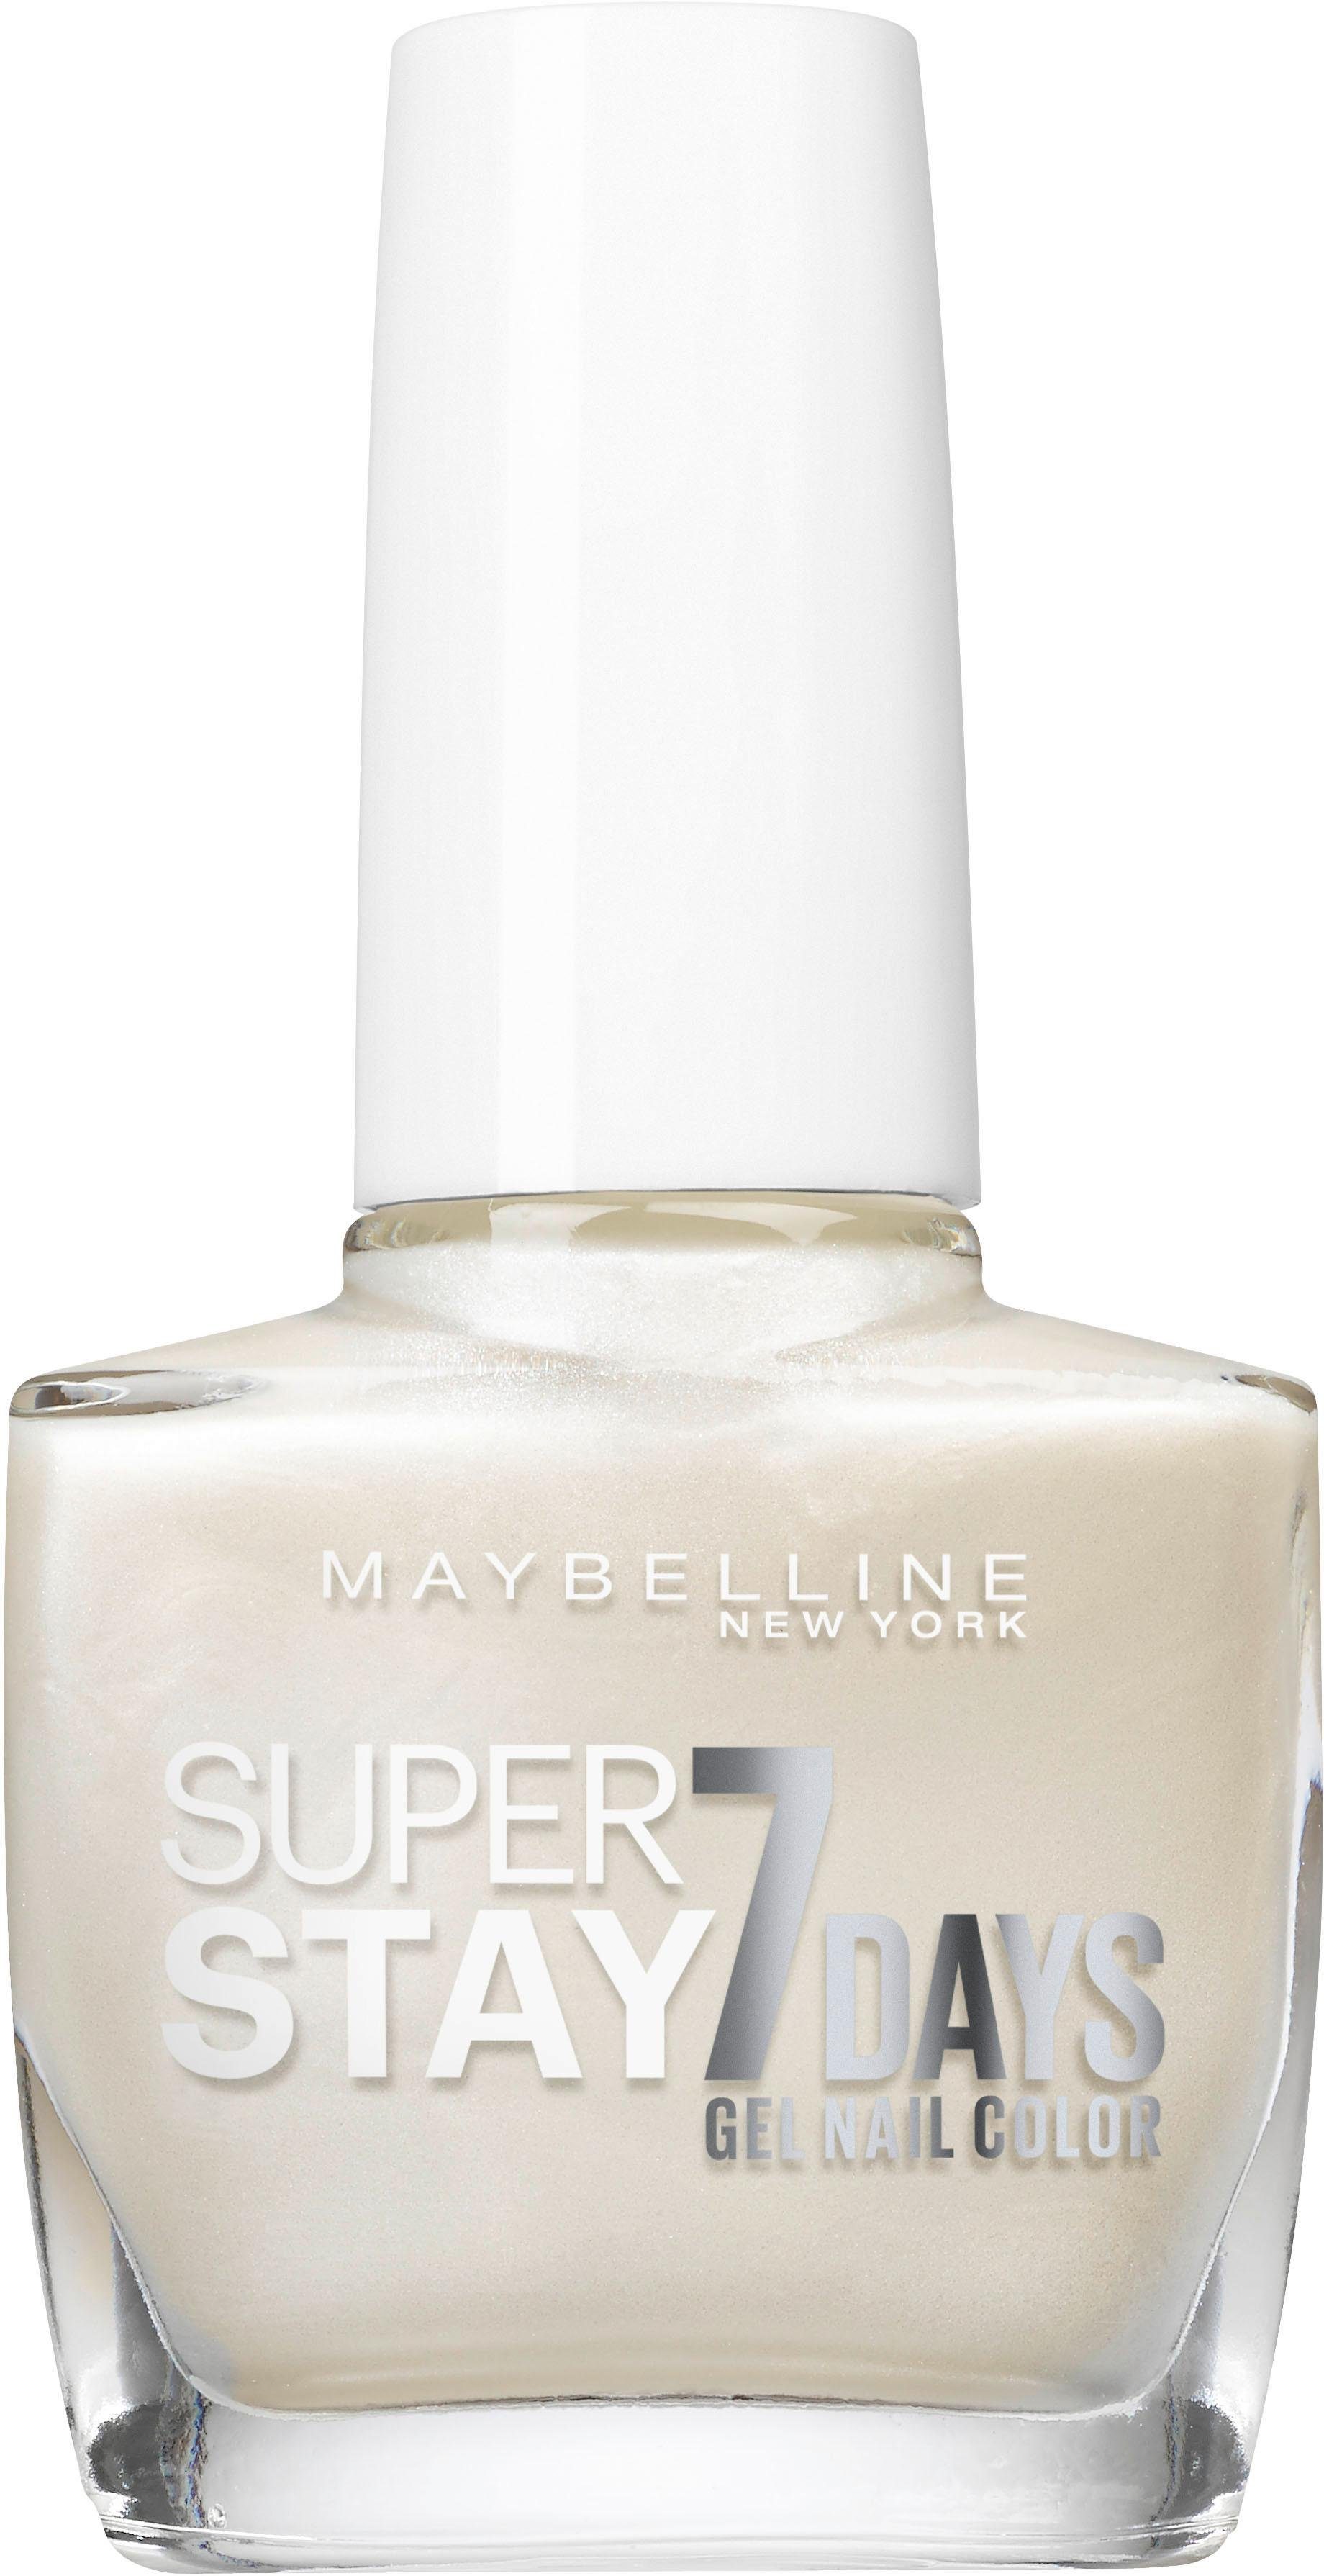 MAYBELLINE NEW YORK Nagellack Superstay 7 Days Nr. 77 pearly white